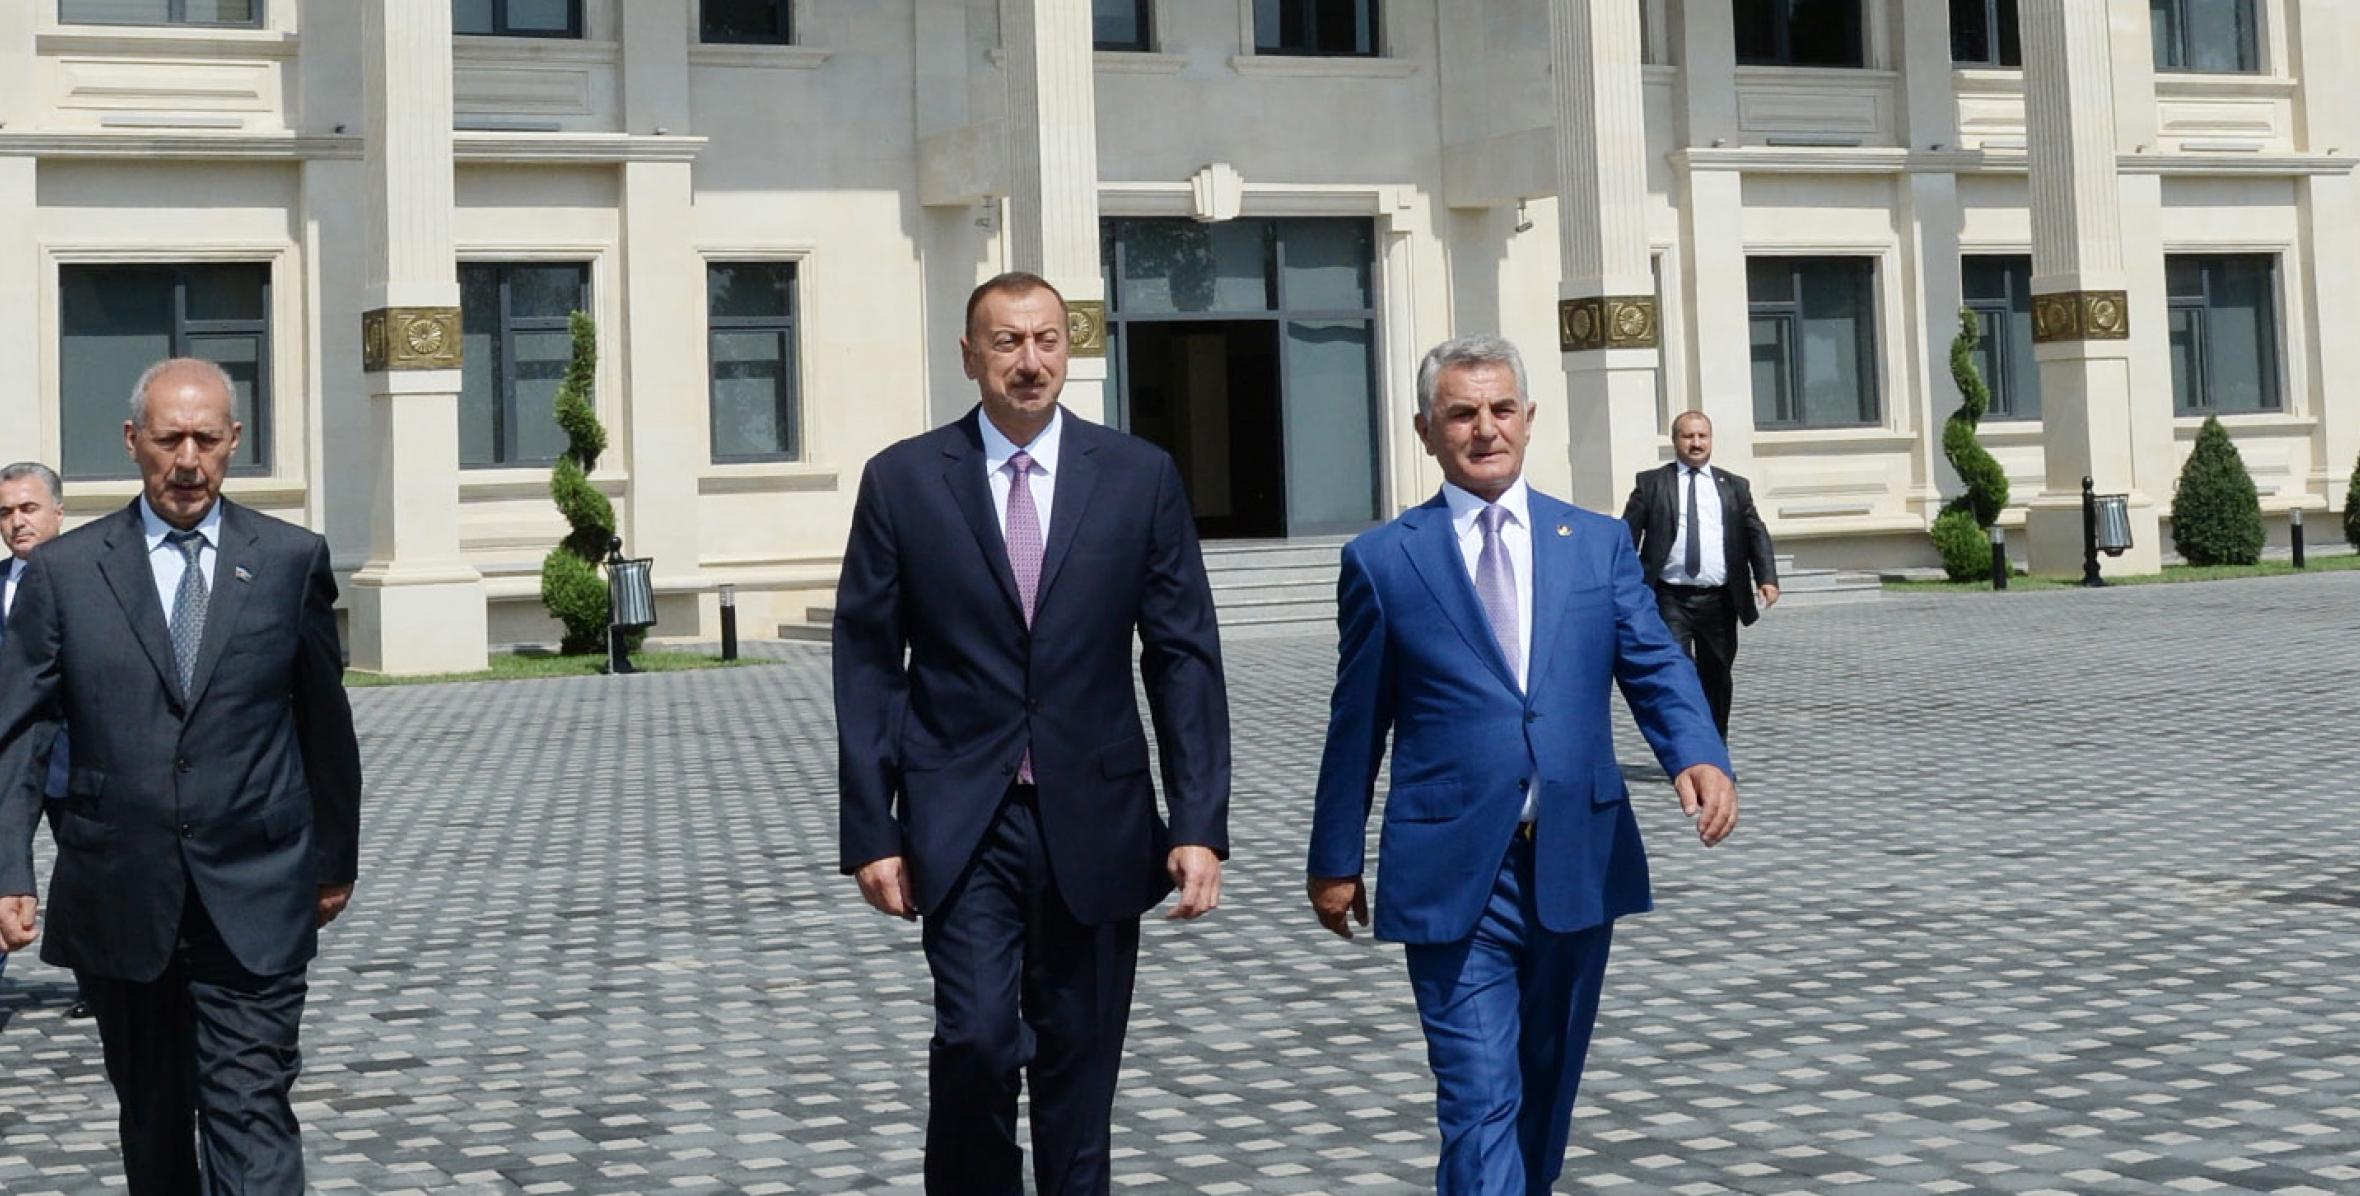 Ilham Aliyev reviewed the new office building of the Executive Authority of Bilasuvar District